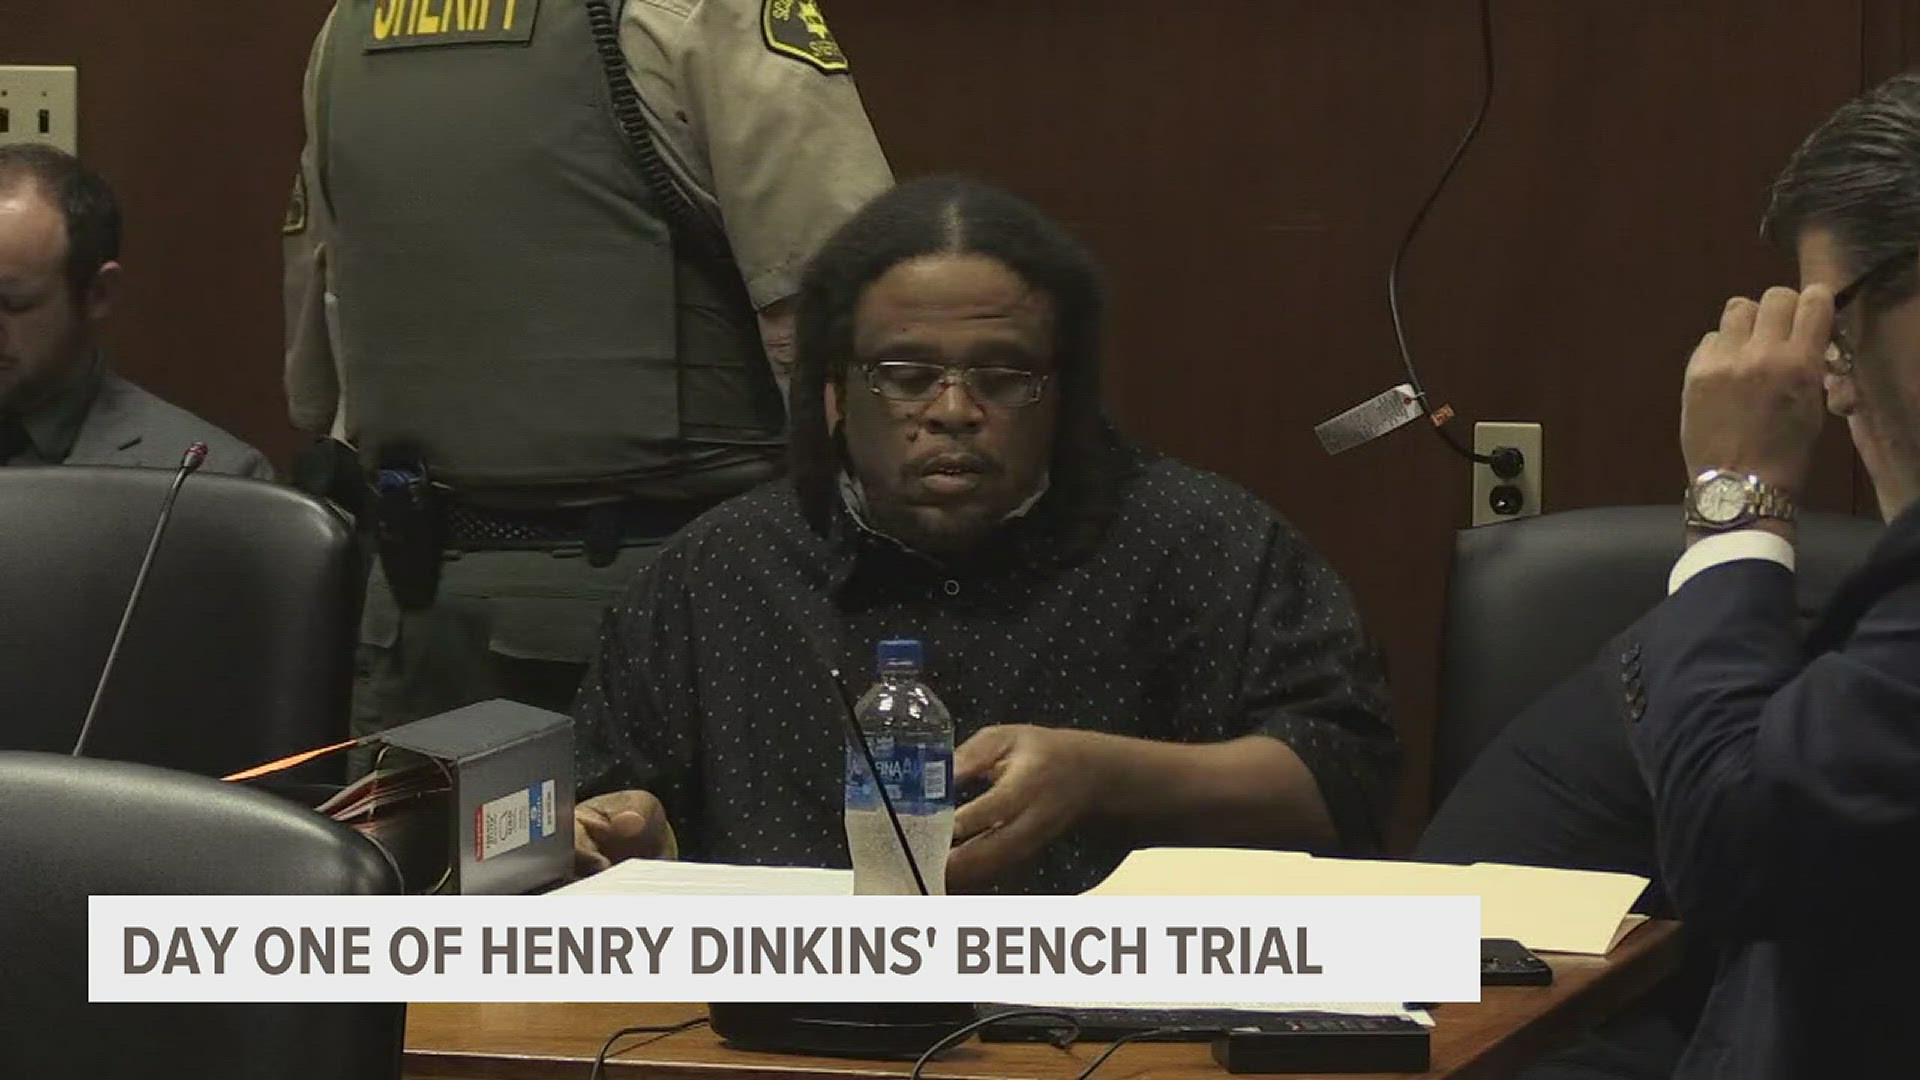 The trial of Henry Dinkins began with the State's opening statement and the first witnesses on Thursday, Aug. 10 in a Scott County courtroom.